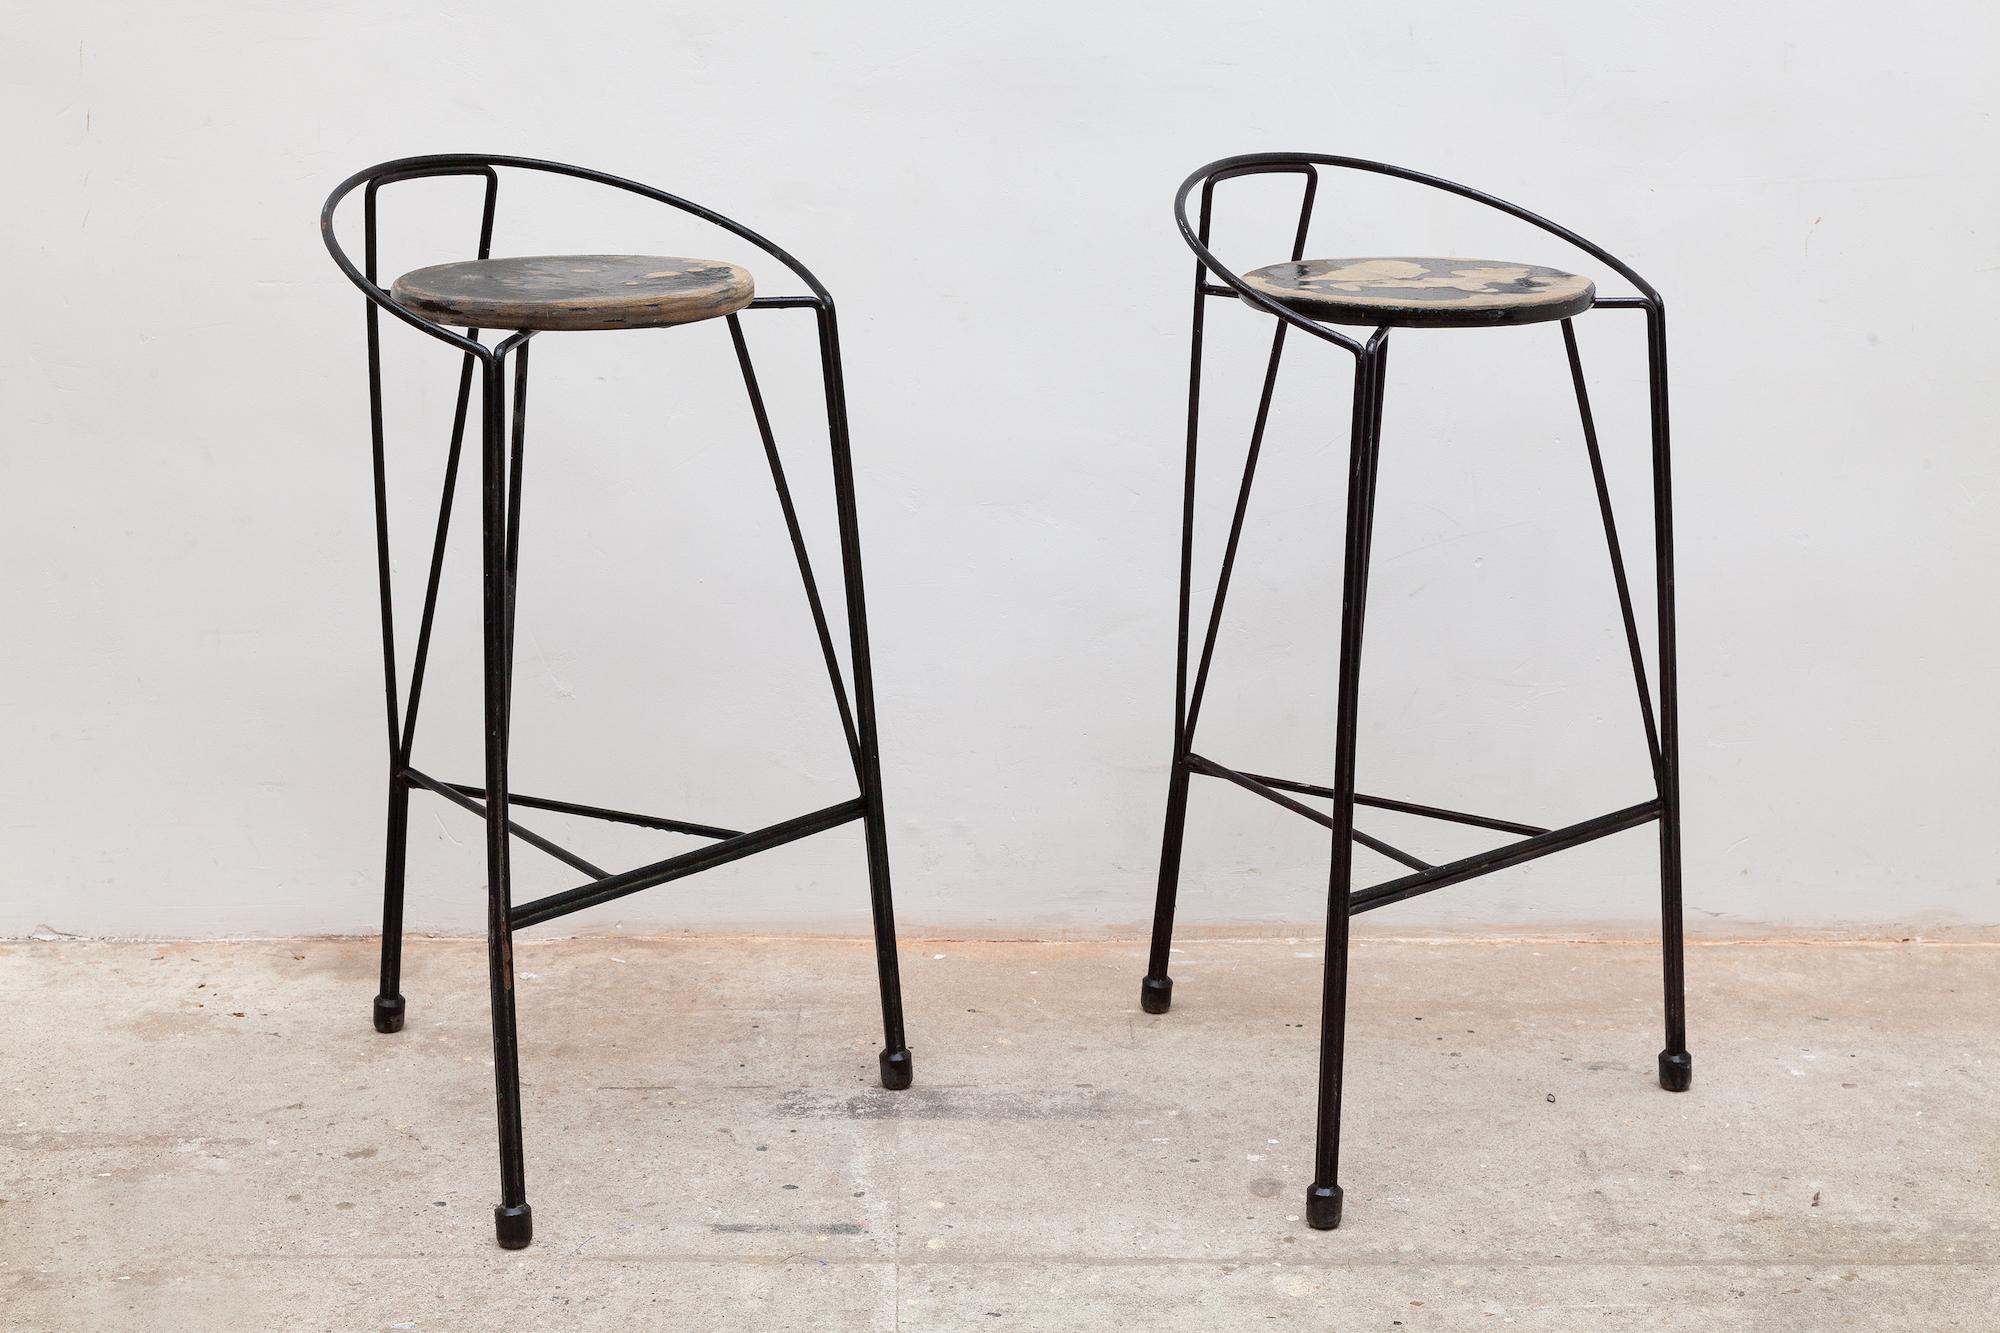 Vintage midcentury bar stools. Modernist black metal tripod wrought iron frame with rubber capped feet. Vintage patina and wear to the surface of the seat and frame. In excellent structural condition.
Dimensions: 46 W x 90 H x 40 D cm, seat 81 cm